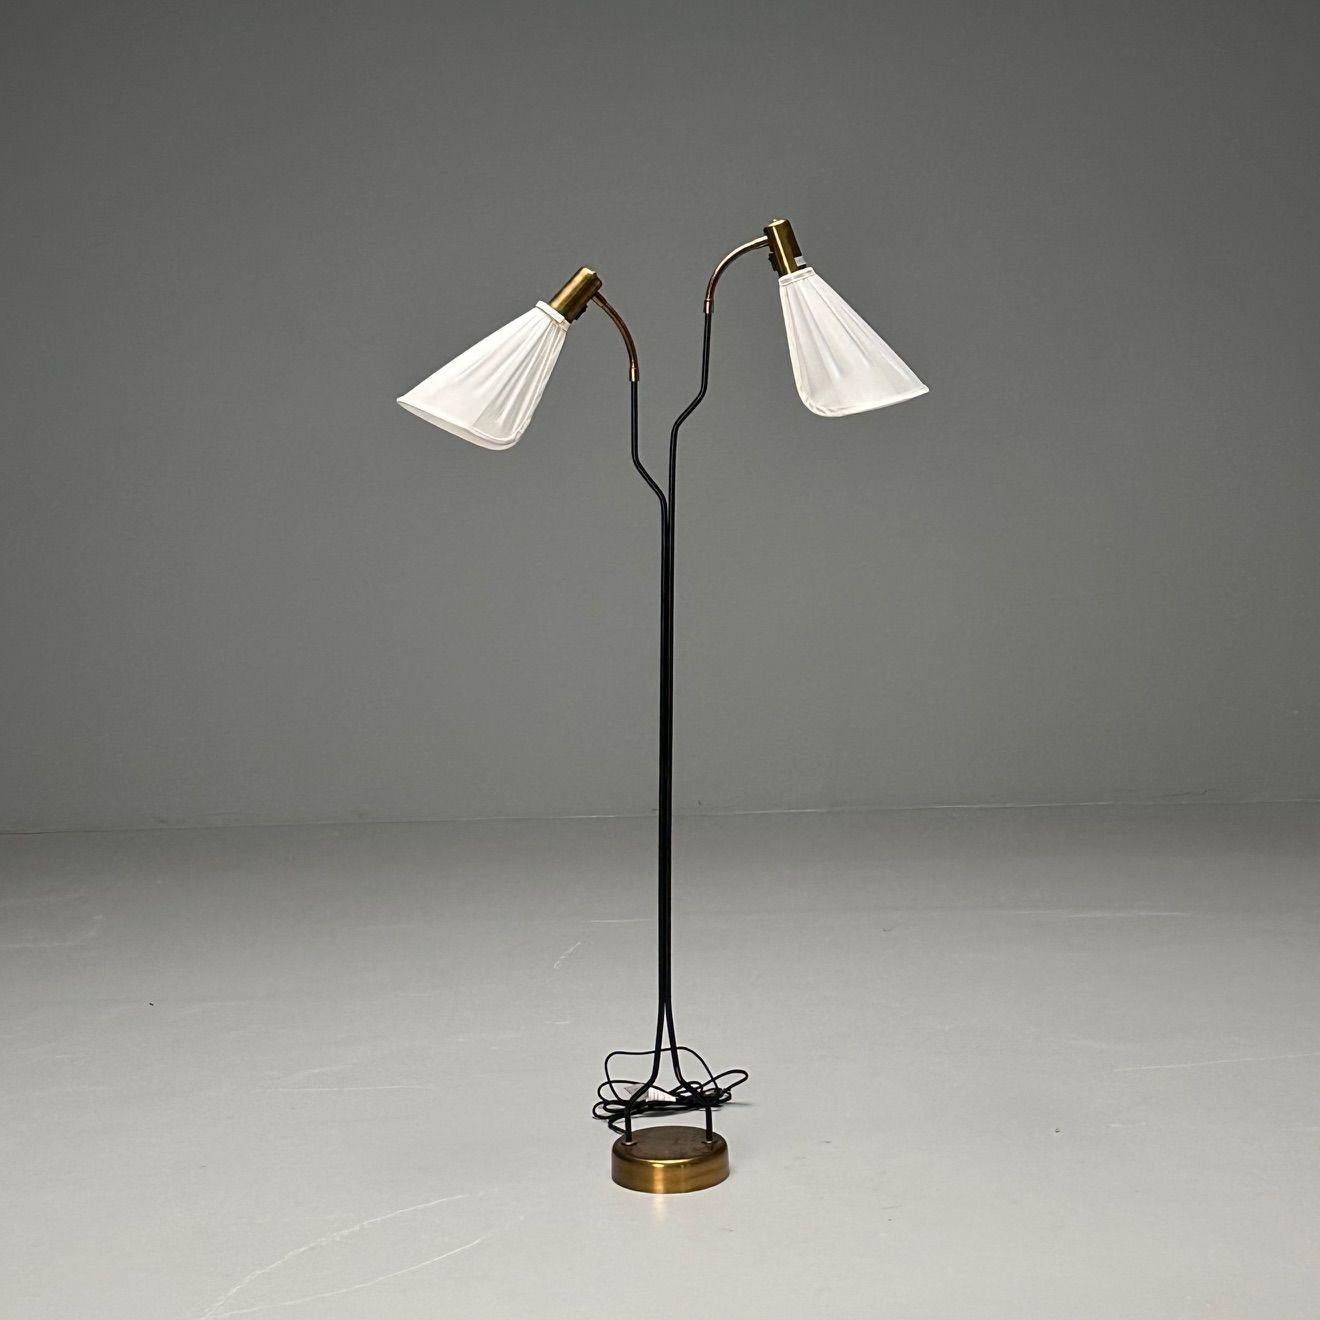 Swedish Mid-Century Modern, Organic Floor Lamp, Black Lacquer, Sweden, 2000s

Swedish modern floor lamp designed and produced in the 20th century. This example features a black lacquered metal neck, a brass brass, and two adjustable lamp heads with